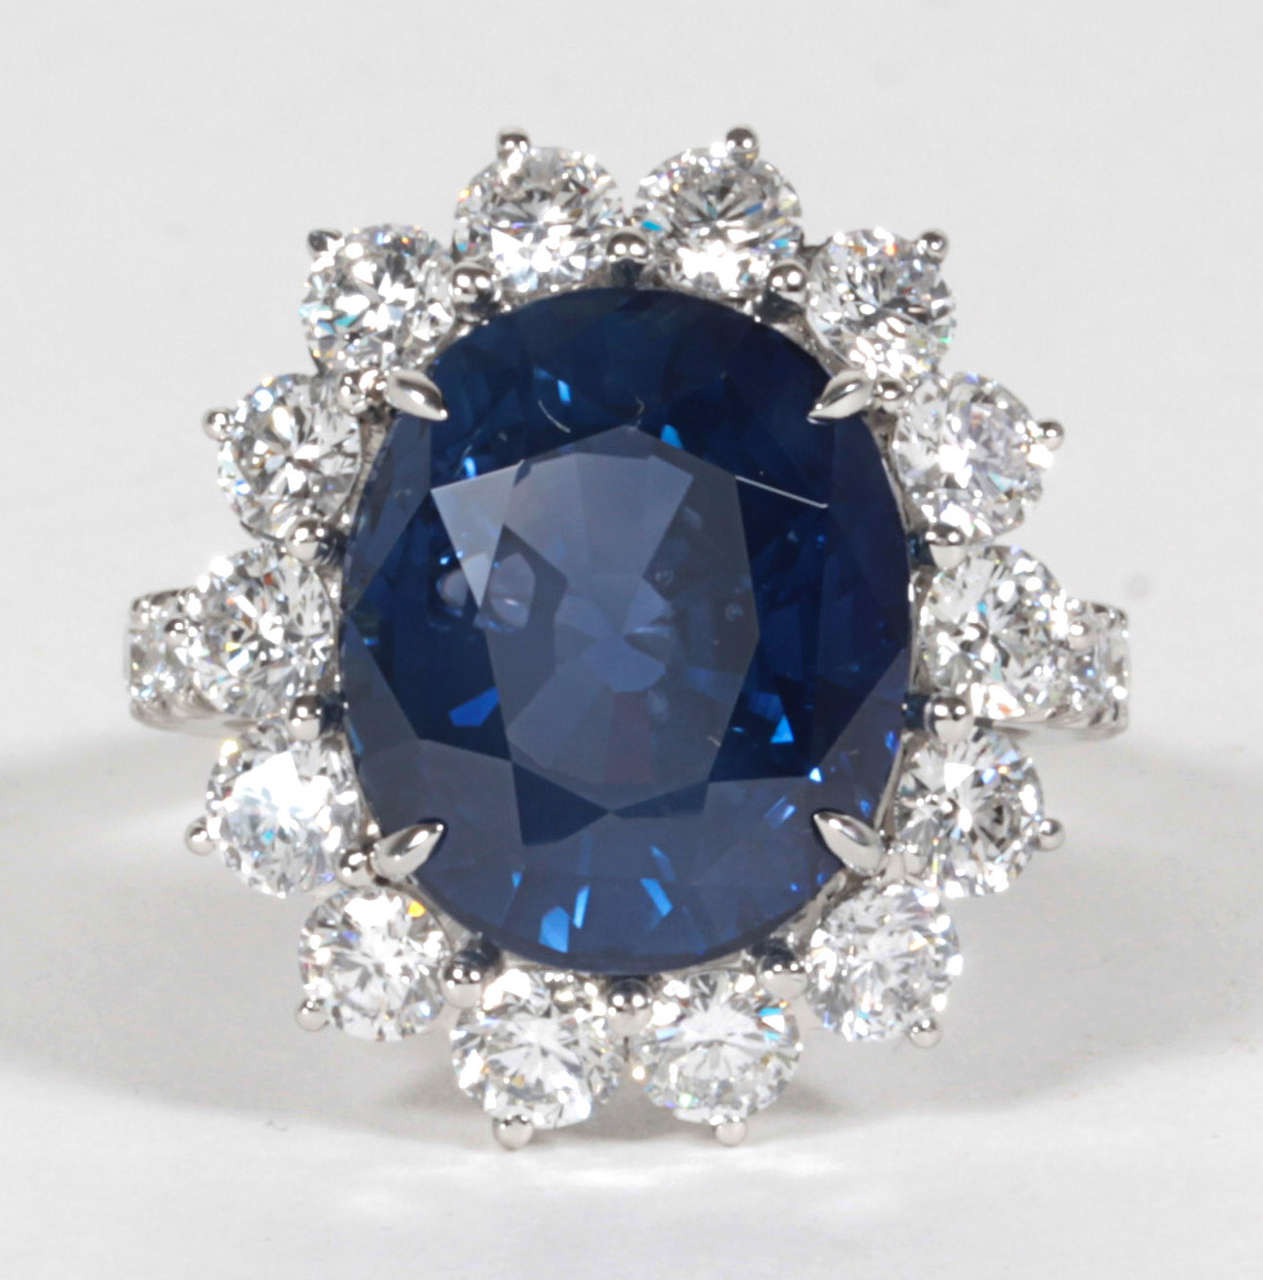 A beautiful ring to add to any collection.

11.73 oval beautiful vivid blue sapphire certified by GIA.

2.85 carats of F-G color VS clarity diamonds set in a custom handmade platinum mounting.